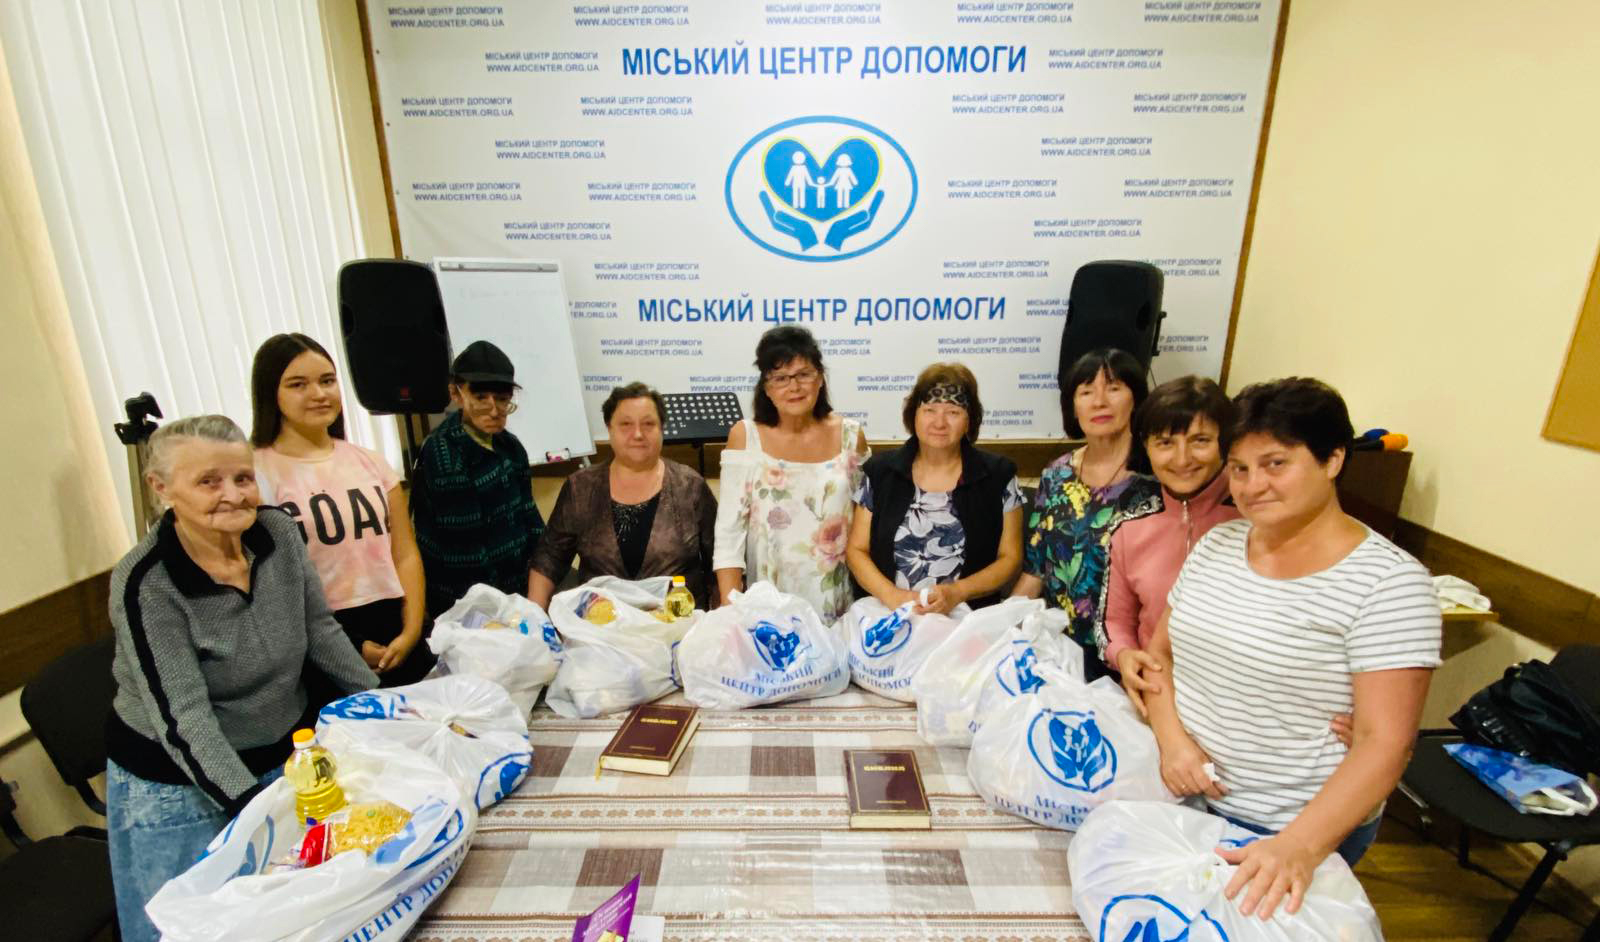 Liliya (middle, in white) and other ladies receive much-needed bags of aid.